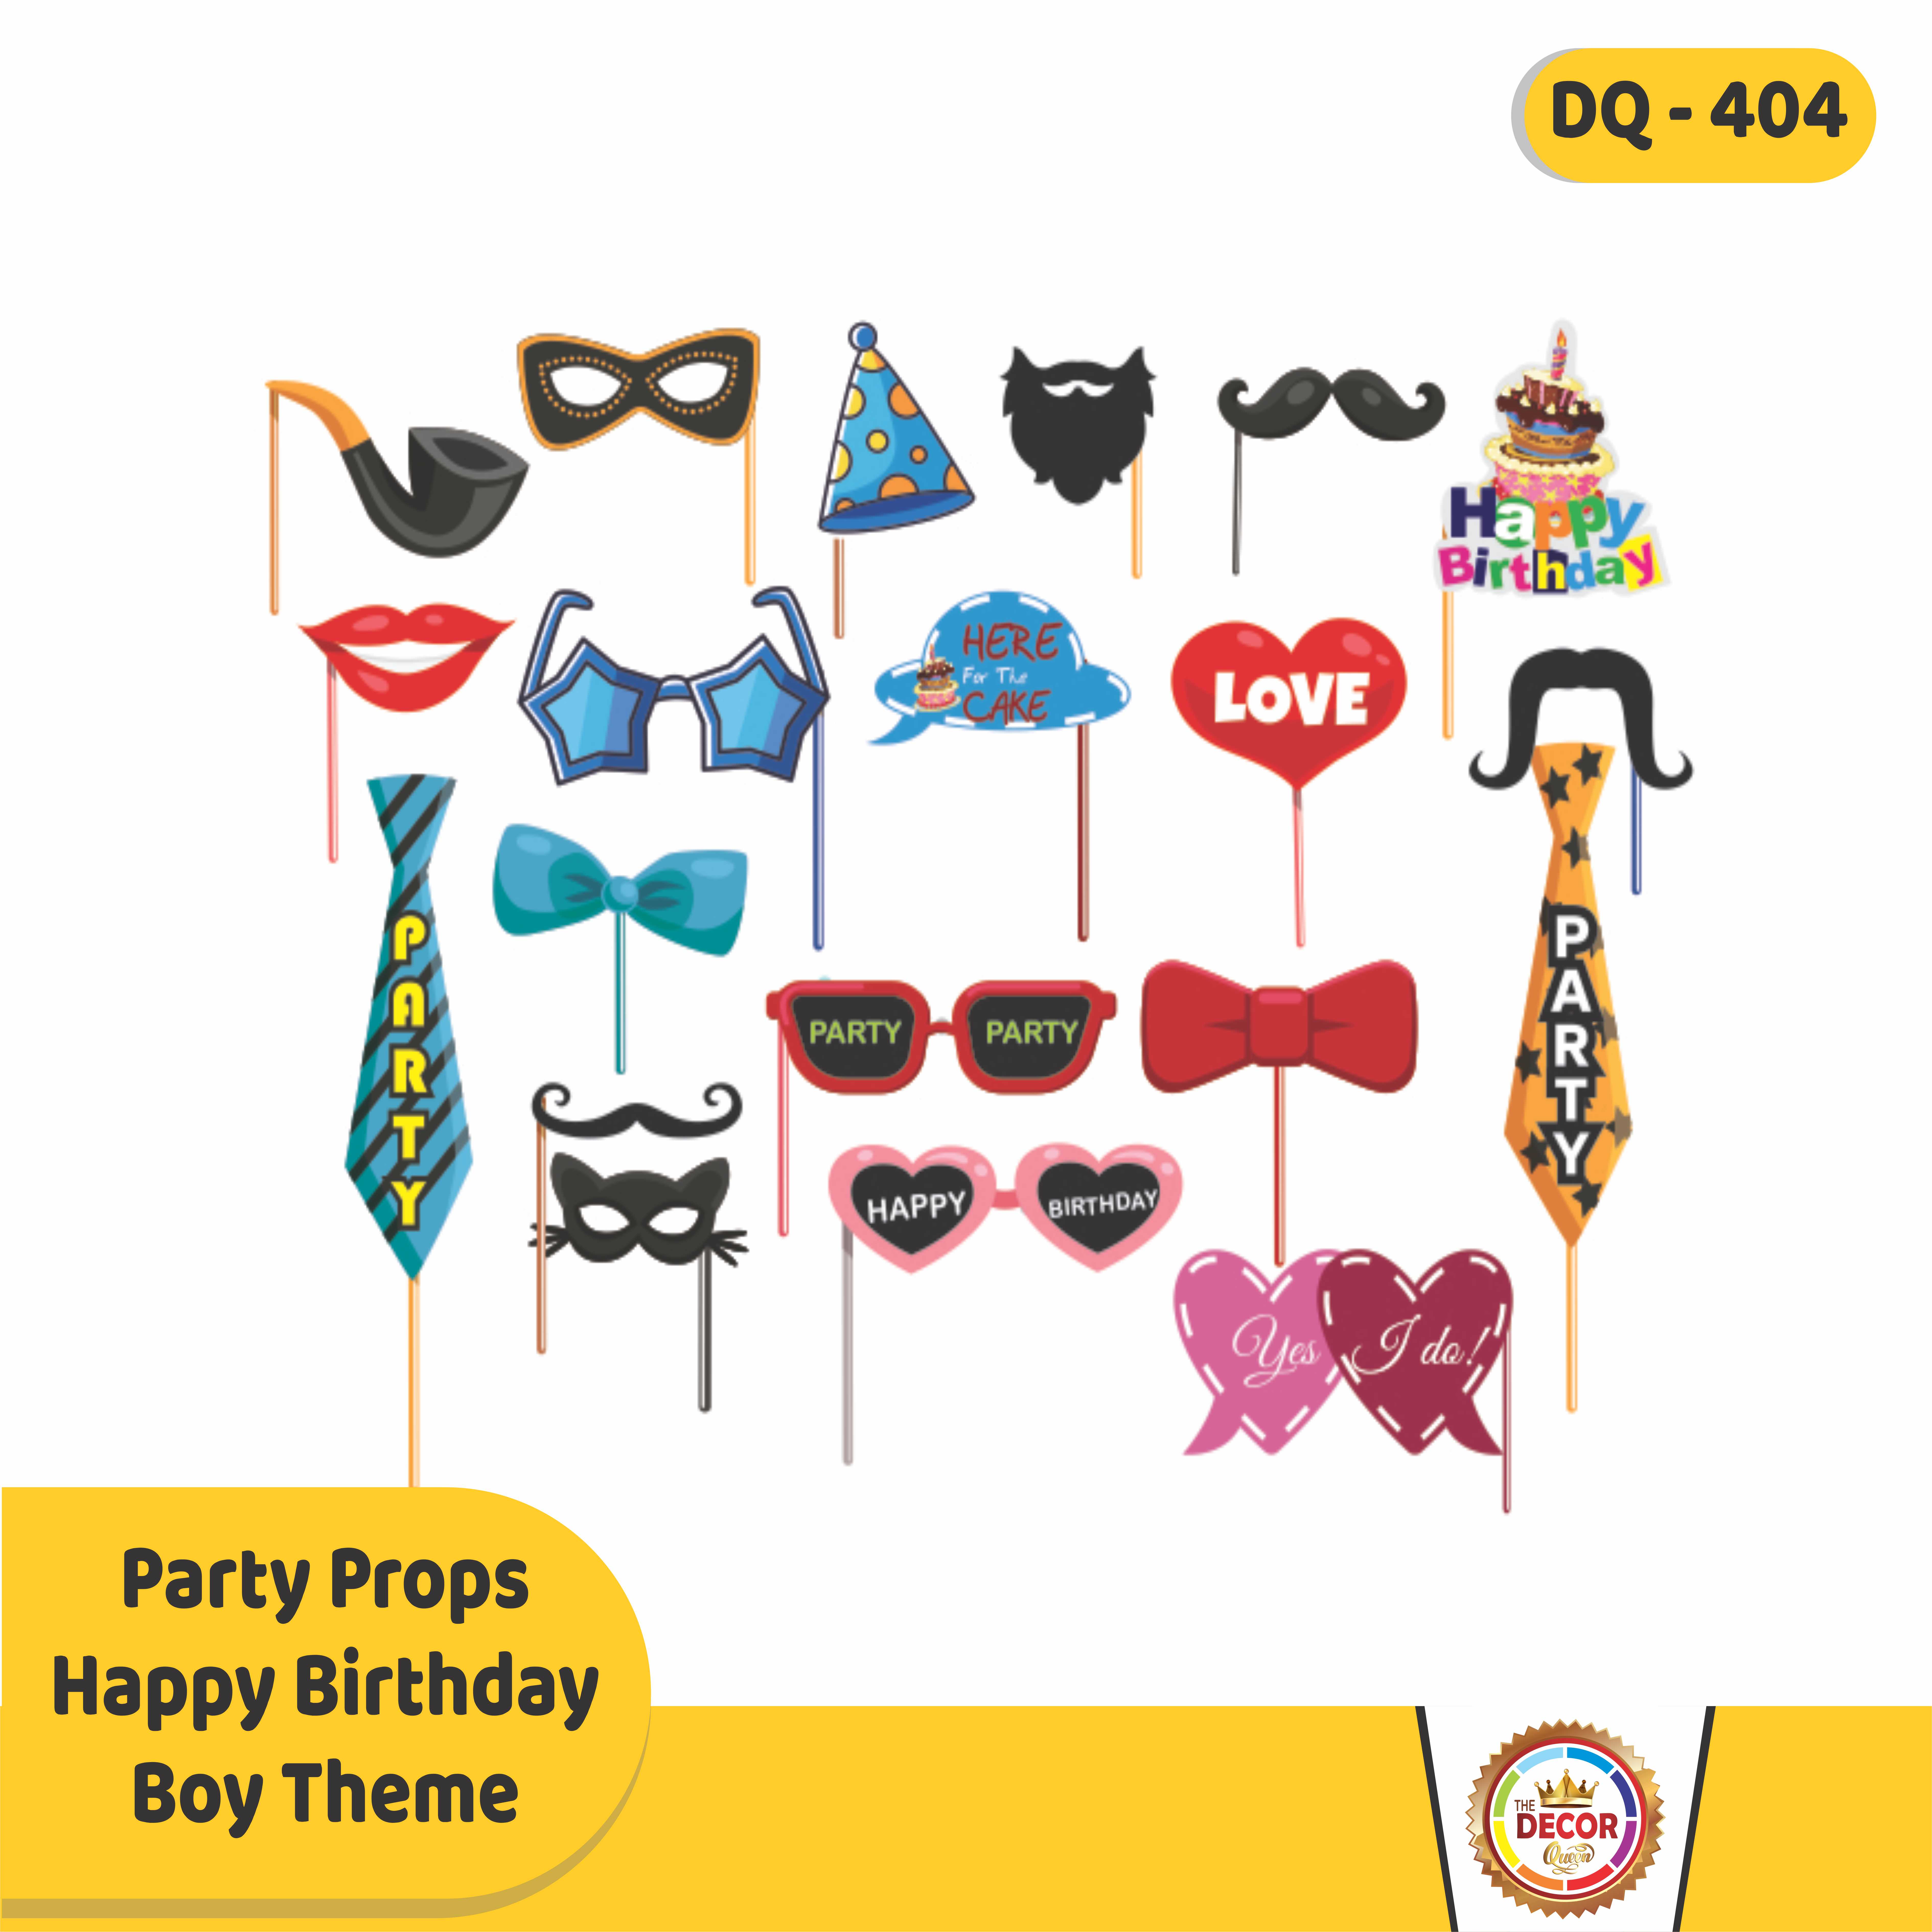 PARTY PROPS HAPPY BIRTHDAY BOY THEME|Party Products|Party Props